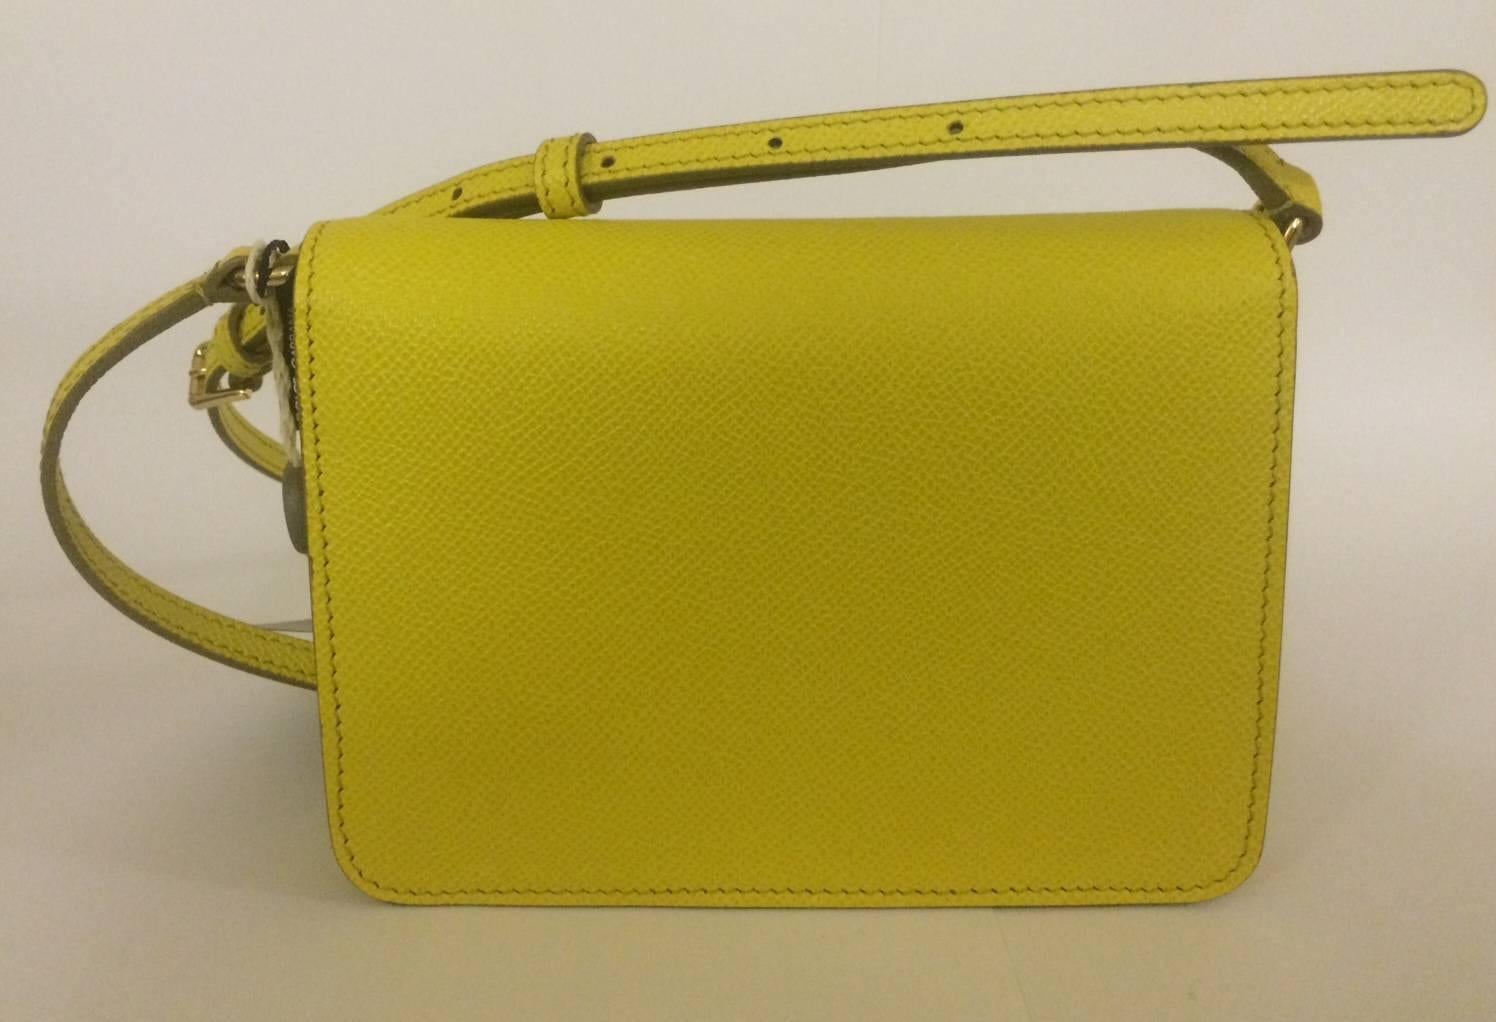 Dolce & Gabbana yellow textured leather cross body bag with front flap closure. Magnetic front snap, card slot beneath flap and at inner bag. Adjustable strap.

Signed 'Dolce & Gabbana, Milano, Italia' at front hardware.

Approximately 6